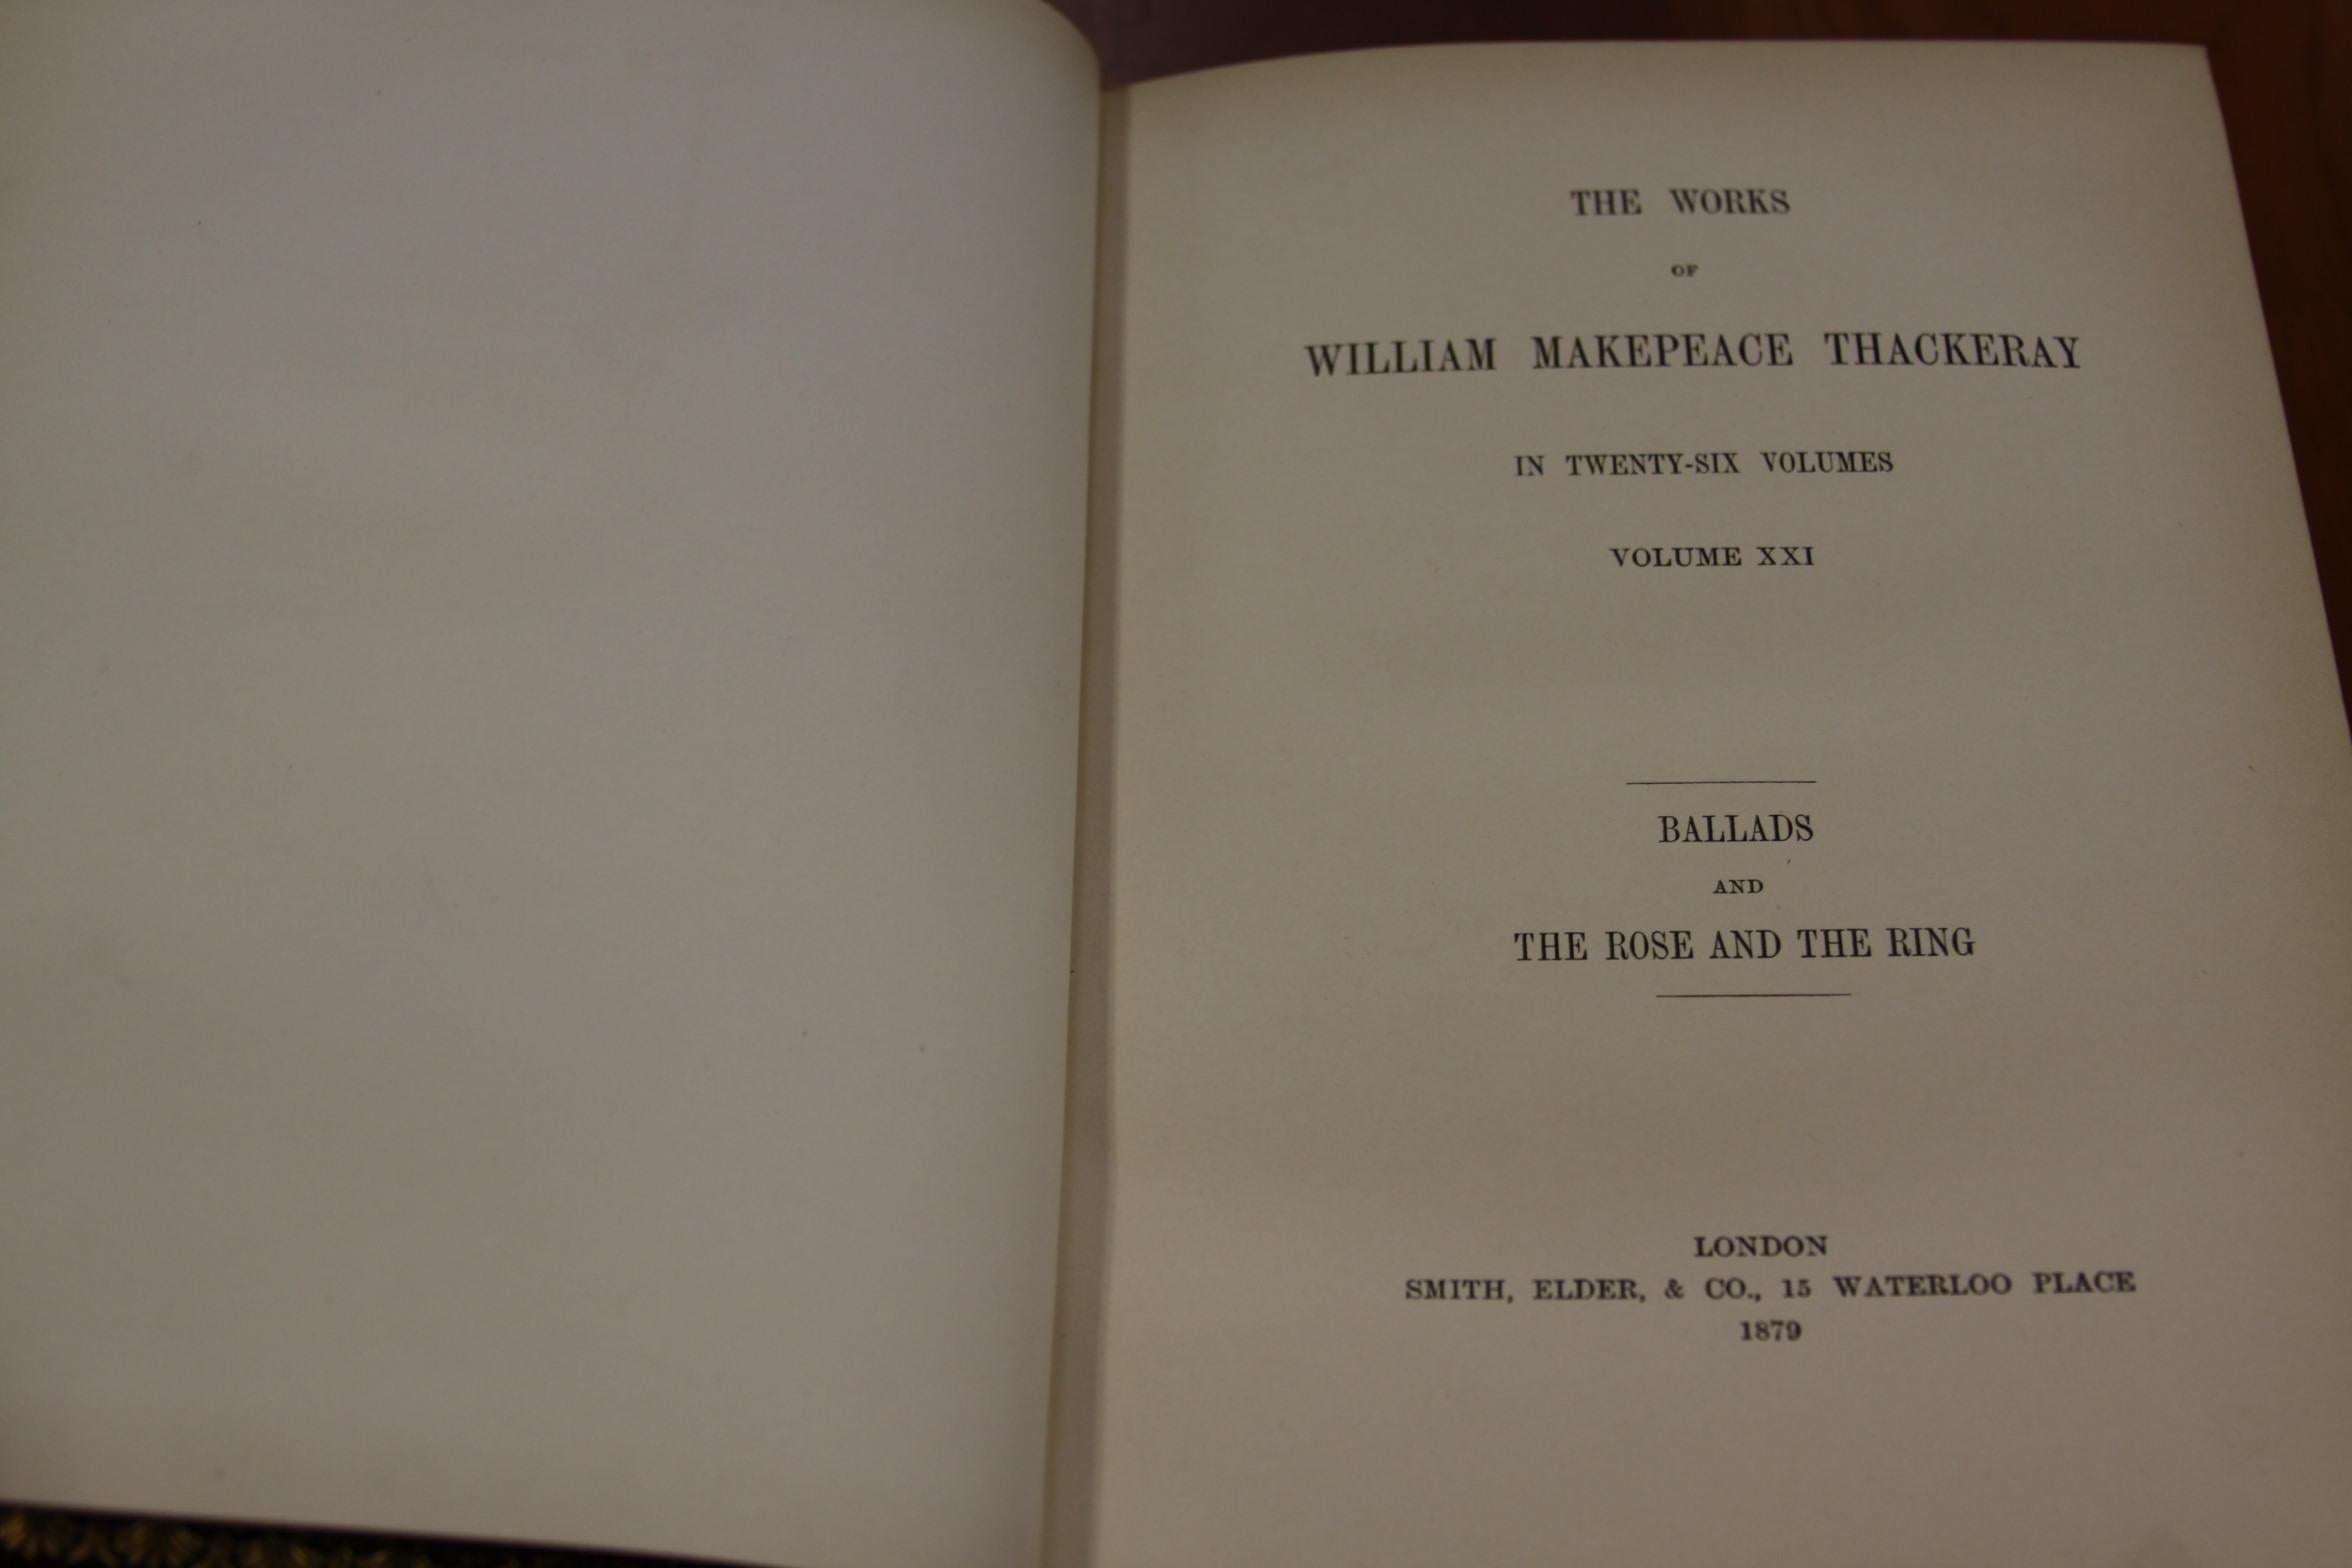 Books, The Writings of William Makepeace Thackeray, Antiques Leather-Bound Set 2